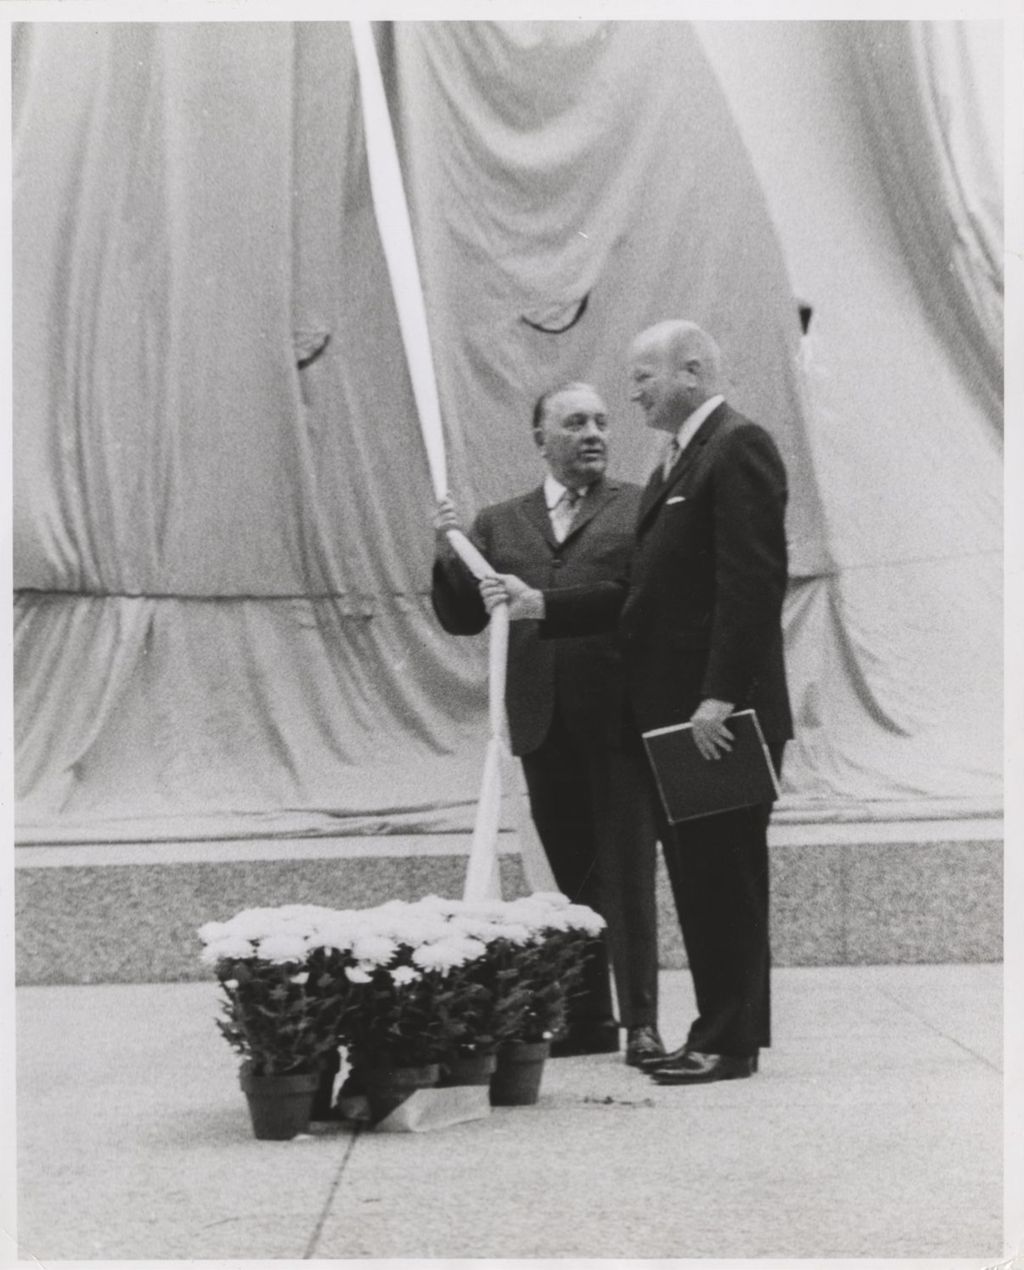 Picasso sculpture dedication ceremony, Richard J. Daley and William E. Hartmann about to unveil the sculpture